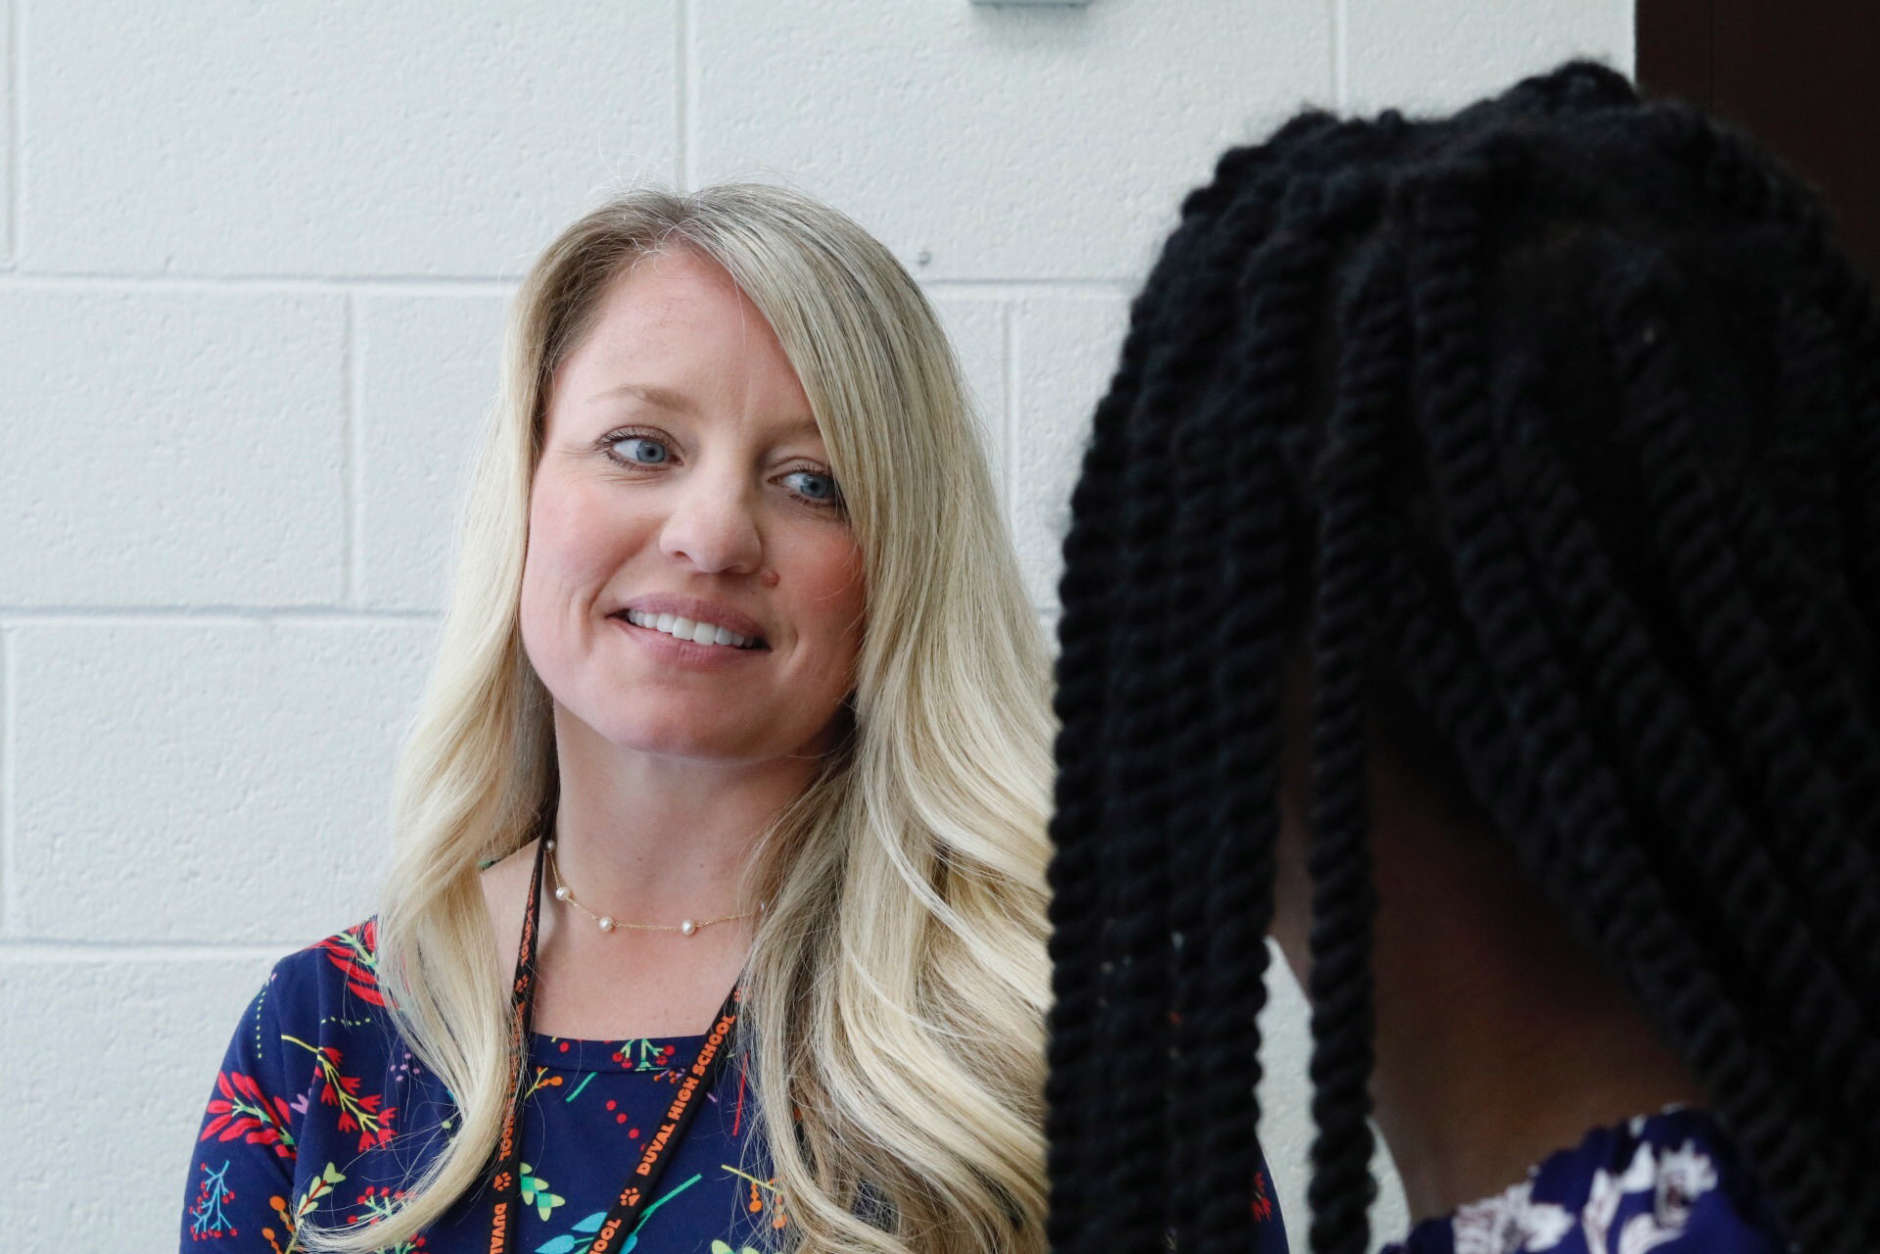 DuVal High School counselor Stacy Kline calls Akinlemibola "one of the top students I've ever had the privilege of working with.” (WTOP/Kate Ryan)